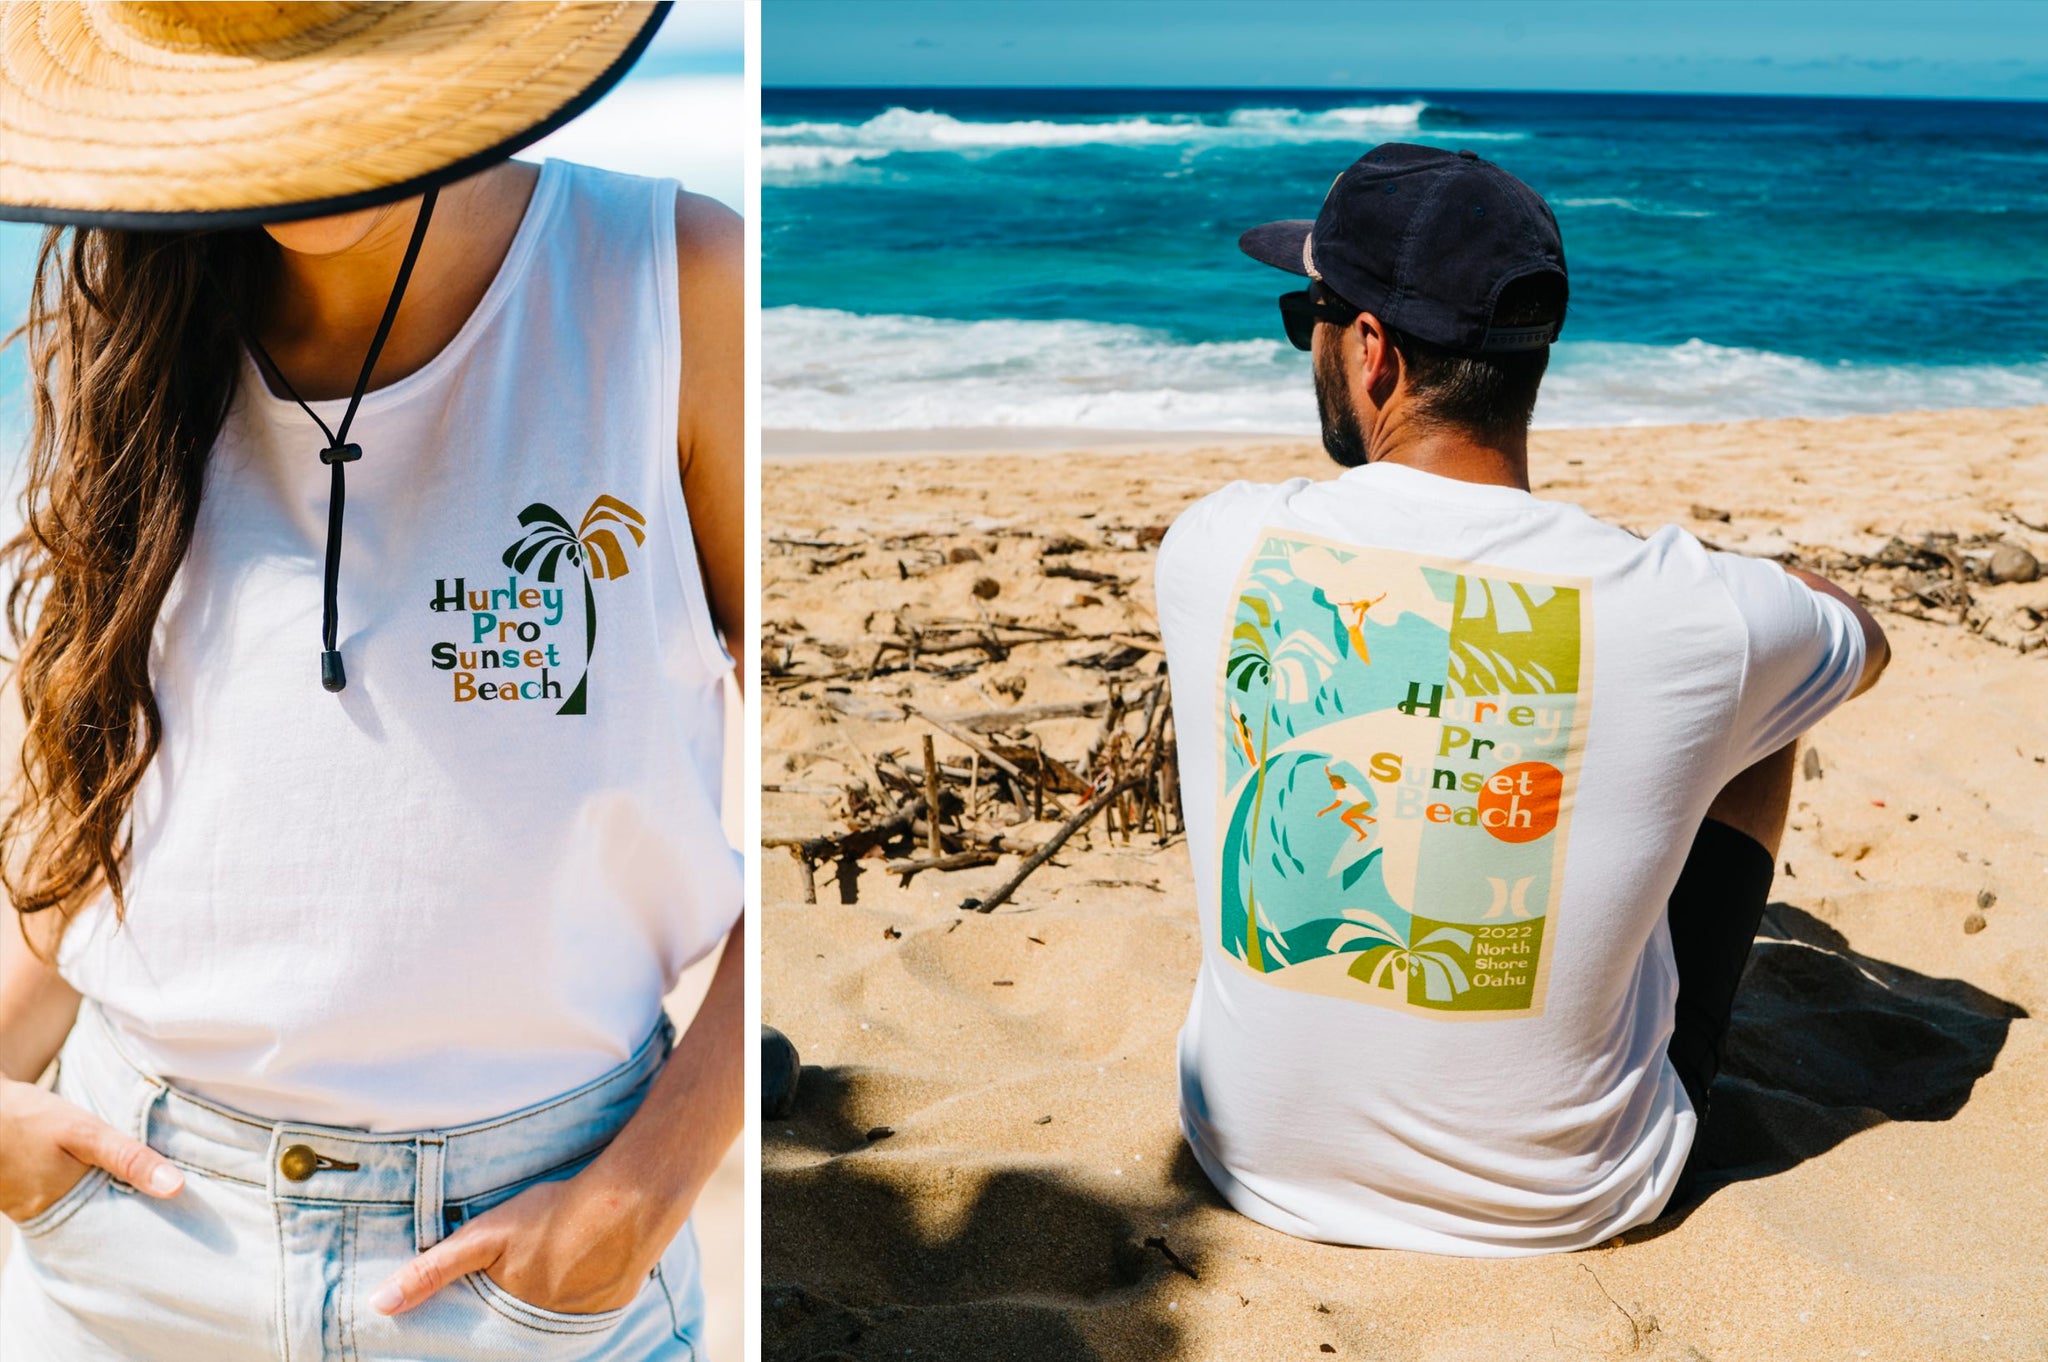 Hurley Drops 3 New Collections in Celebration of the Hurley Pro Sunset Beach